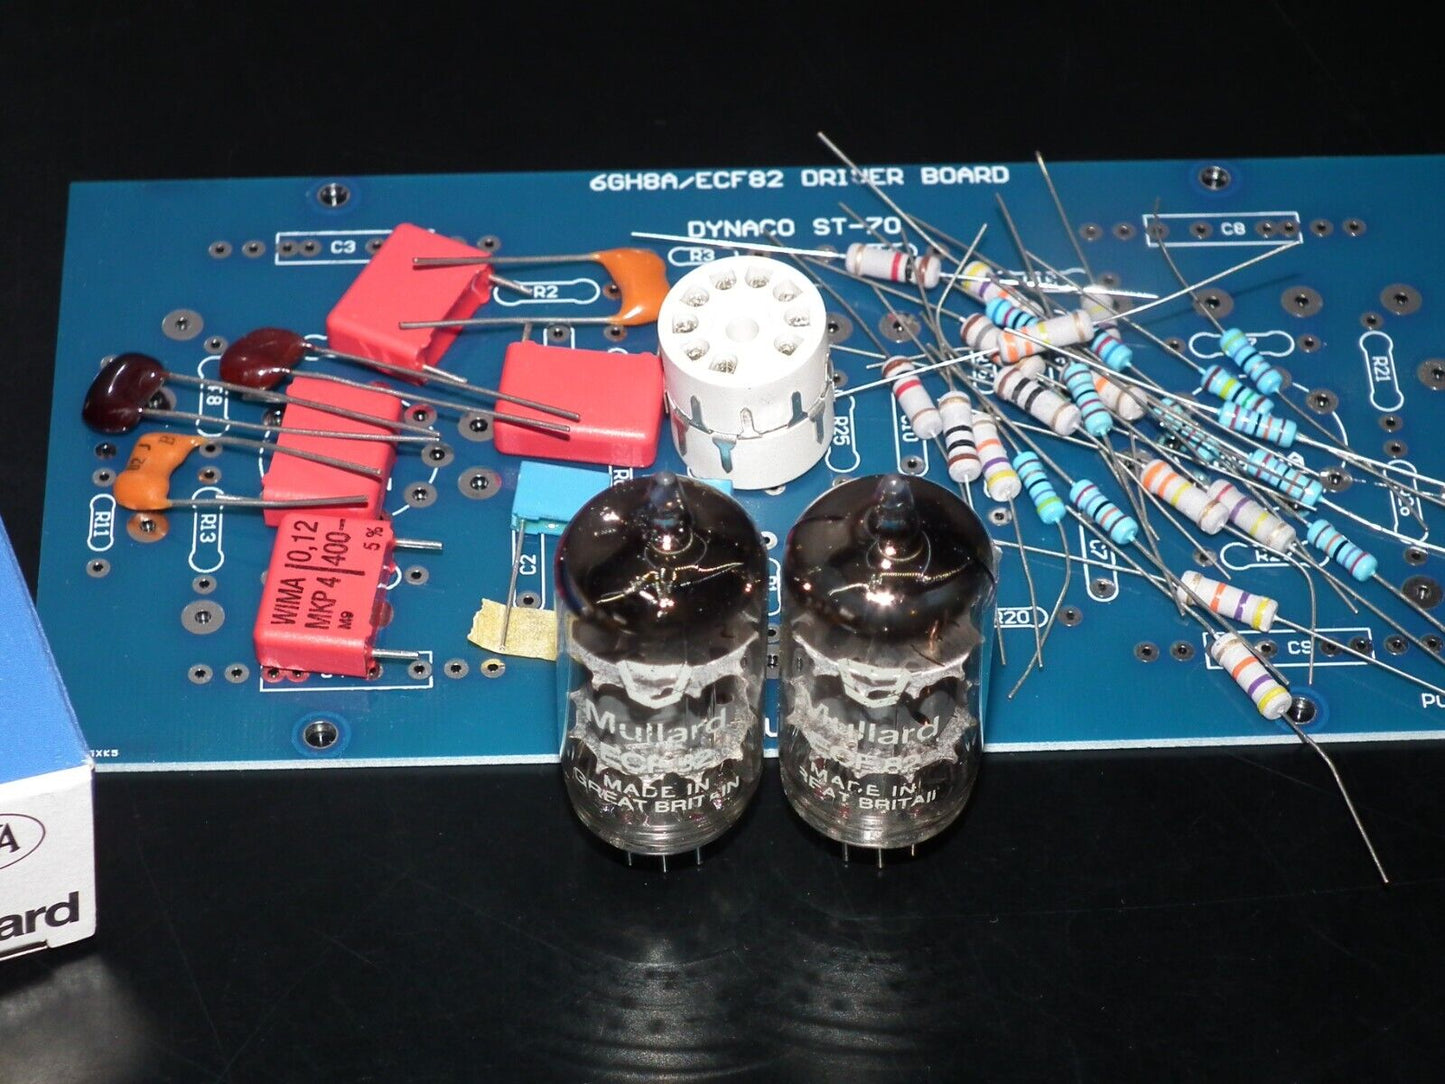 DYNACO ST-70 6GH8A / 6GH8 COMPLETE KIT PC-3 DRIVER BOARD WITH TUBES (NOS Platinum matched pair of 6GH8A ECF82 Mullard Made in Great Britain)